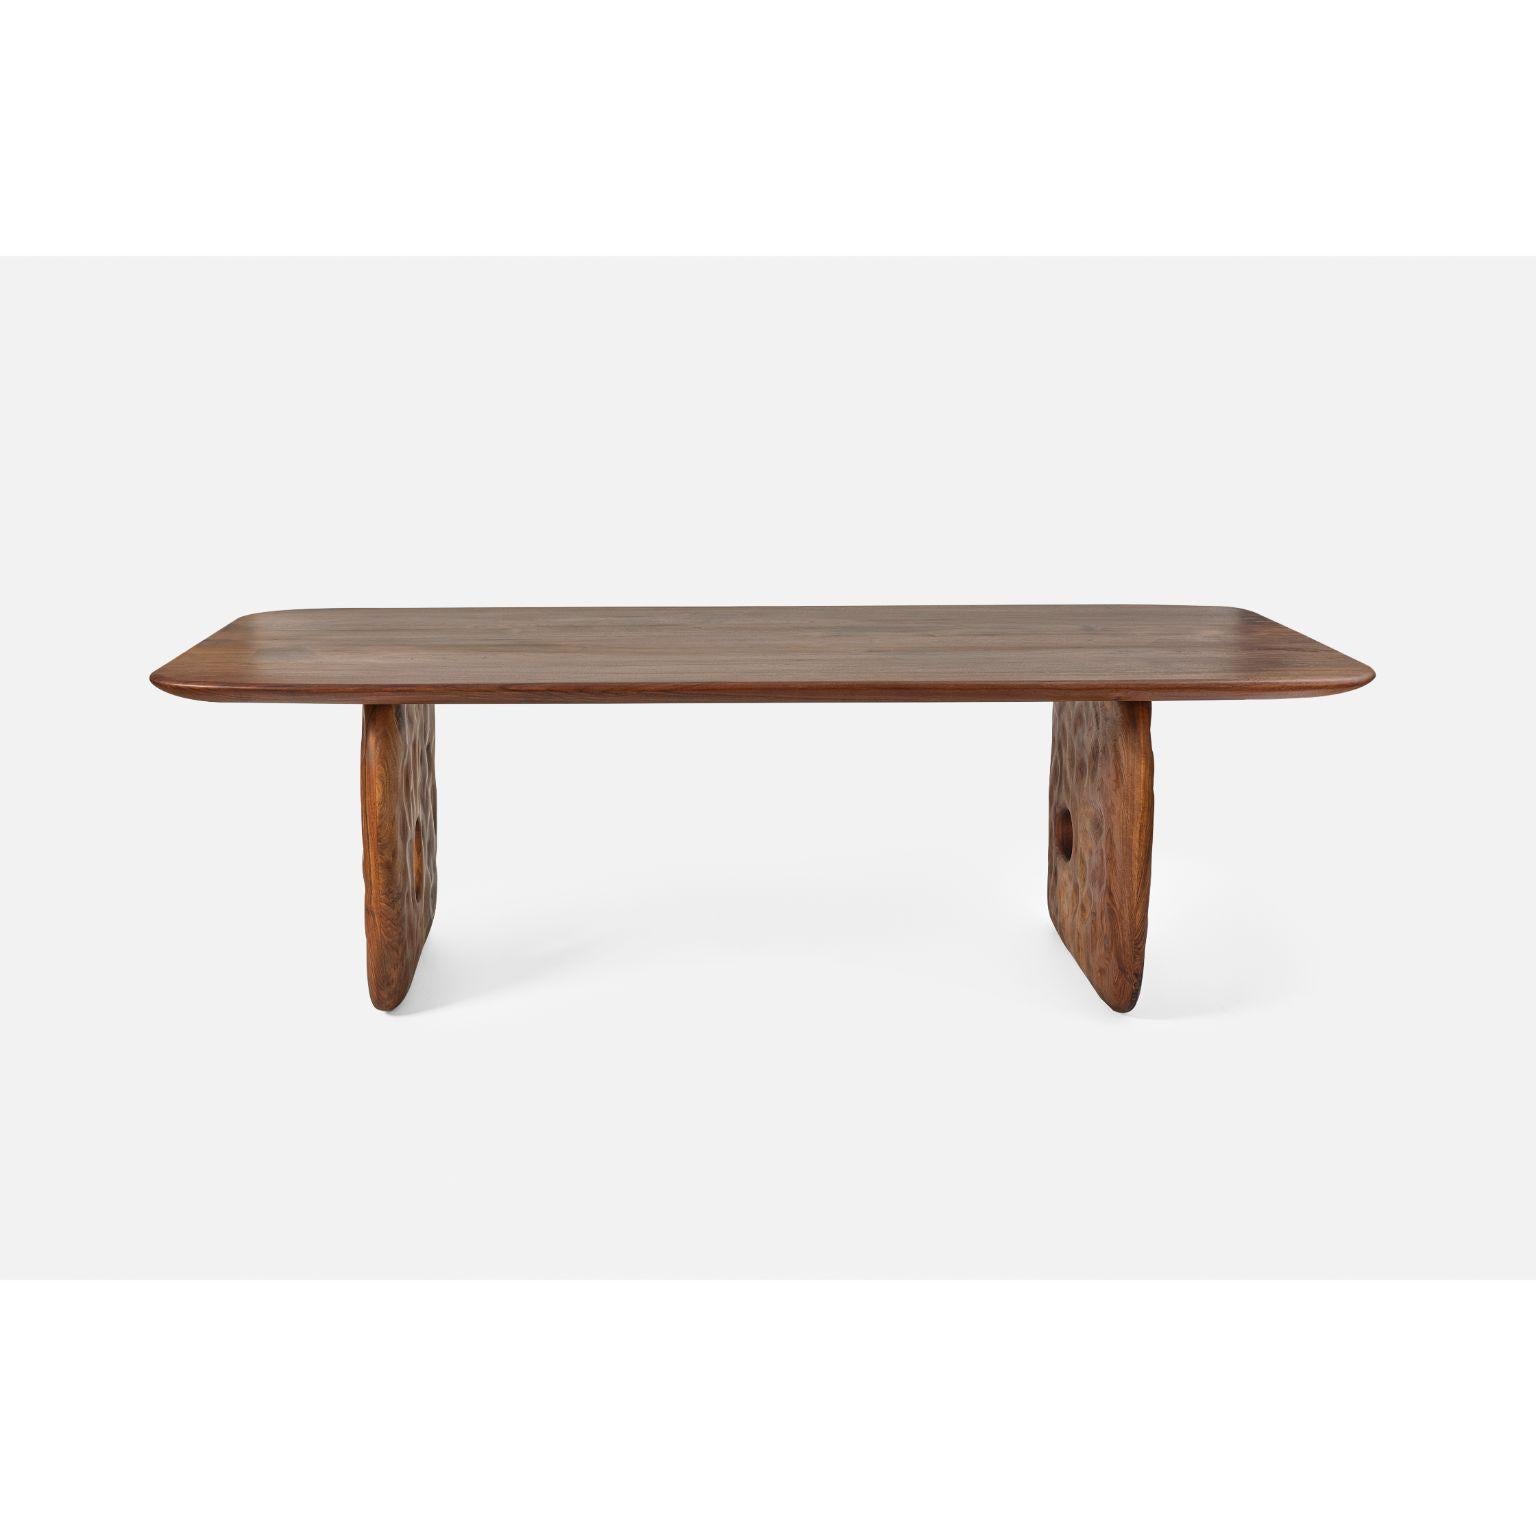 Kagrai Dining Table L by Contemporary Ecowood
Dimensions: W 120 x D 320 x H 75 cm.
Materials: American Clora Walnut.
Color: Natural

Contemporary Ecowood’s story began in a craft workshop in 2009. Our wood passion made us focus on fallen trees in